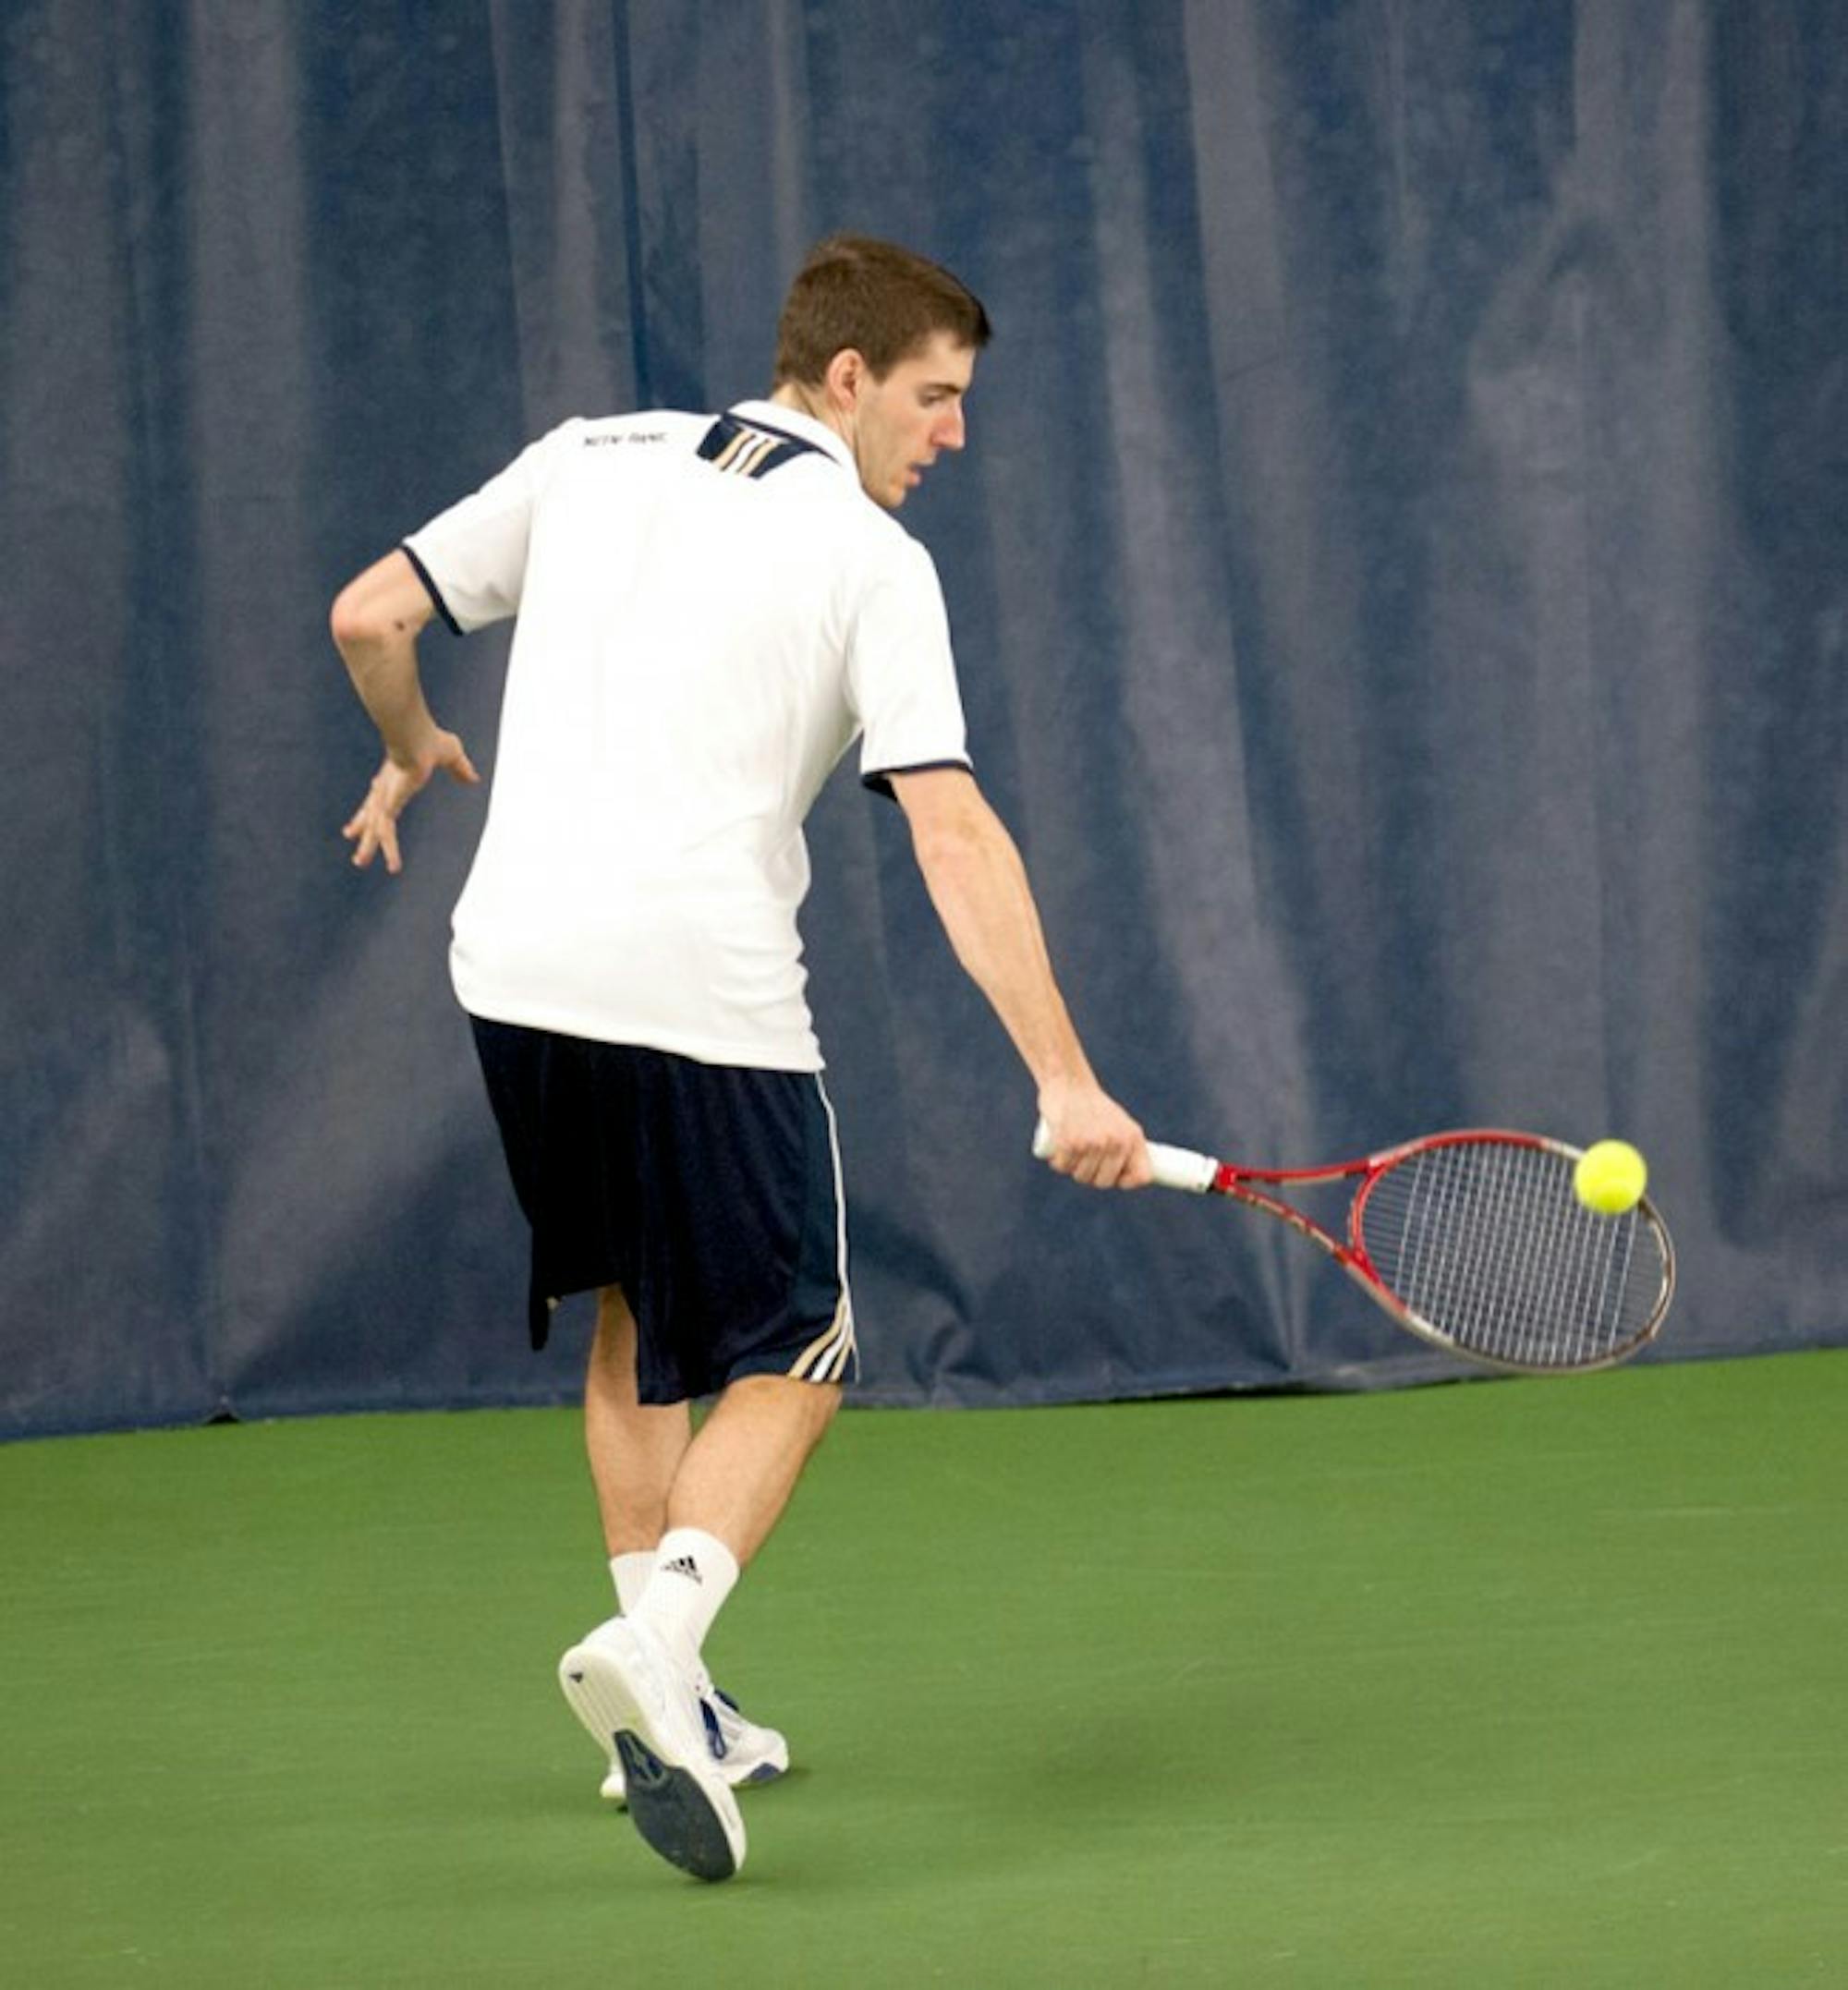 Senior Ryan Bandy reaches for a backhand during a Feb. 28 match against Virginia Tech sophomore Joao Monteiro in Eck Tennis Pavilion. Bandy lost the match, 4-6, 6-1, 6-4.